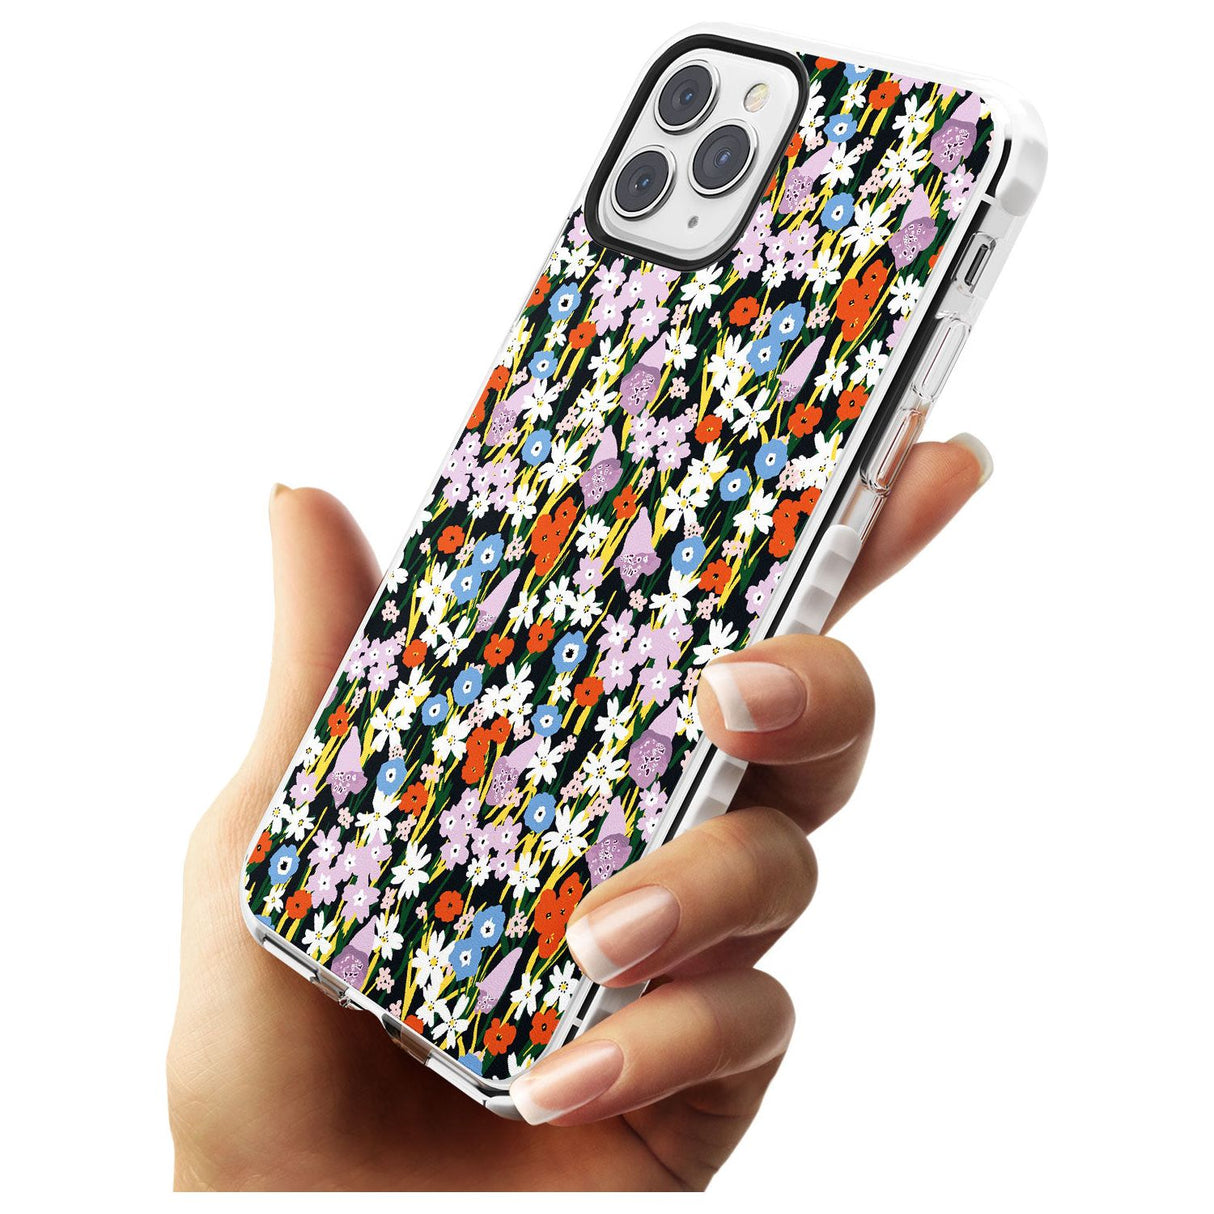 Energetic Floral Mix: Solid Slim TPU Phone Case for iPhone 11 Pro Max